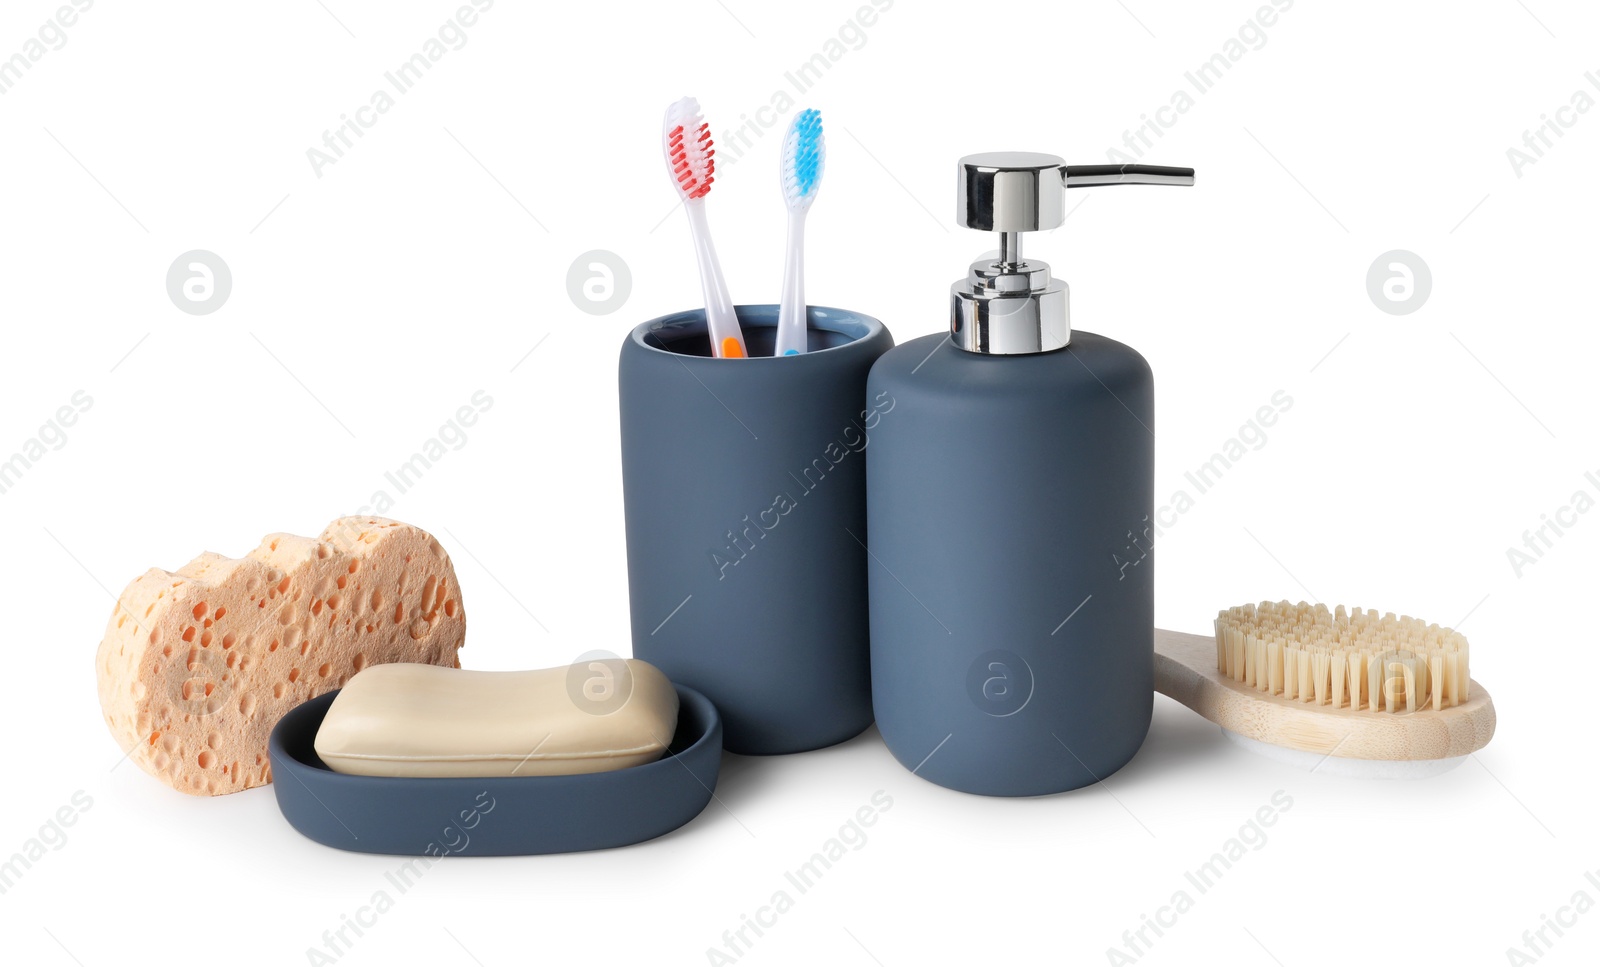 Photo of Bath accessories. Different personal care products isolated on white